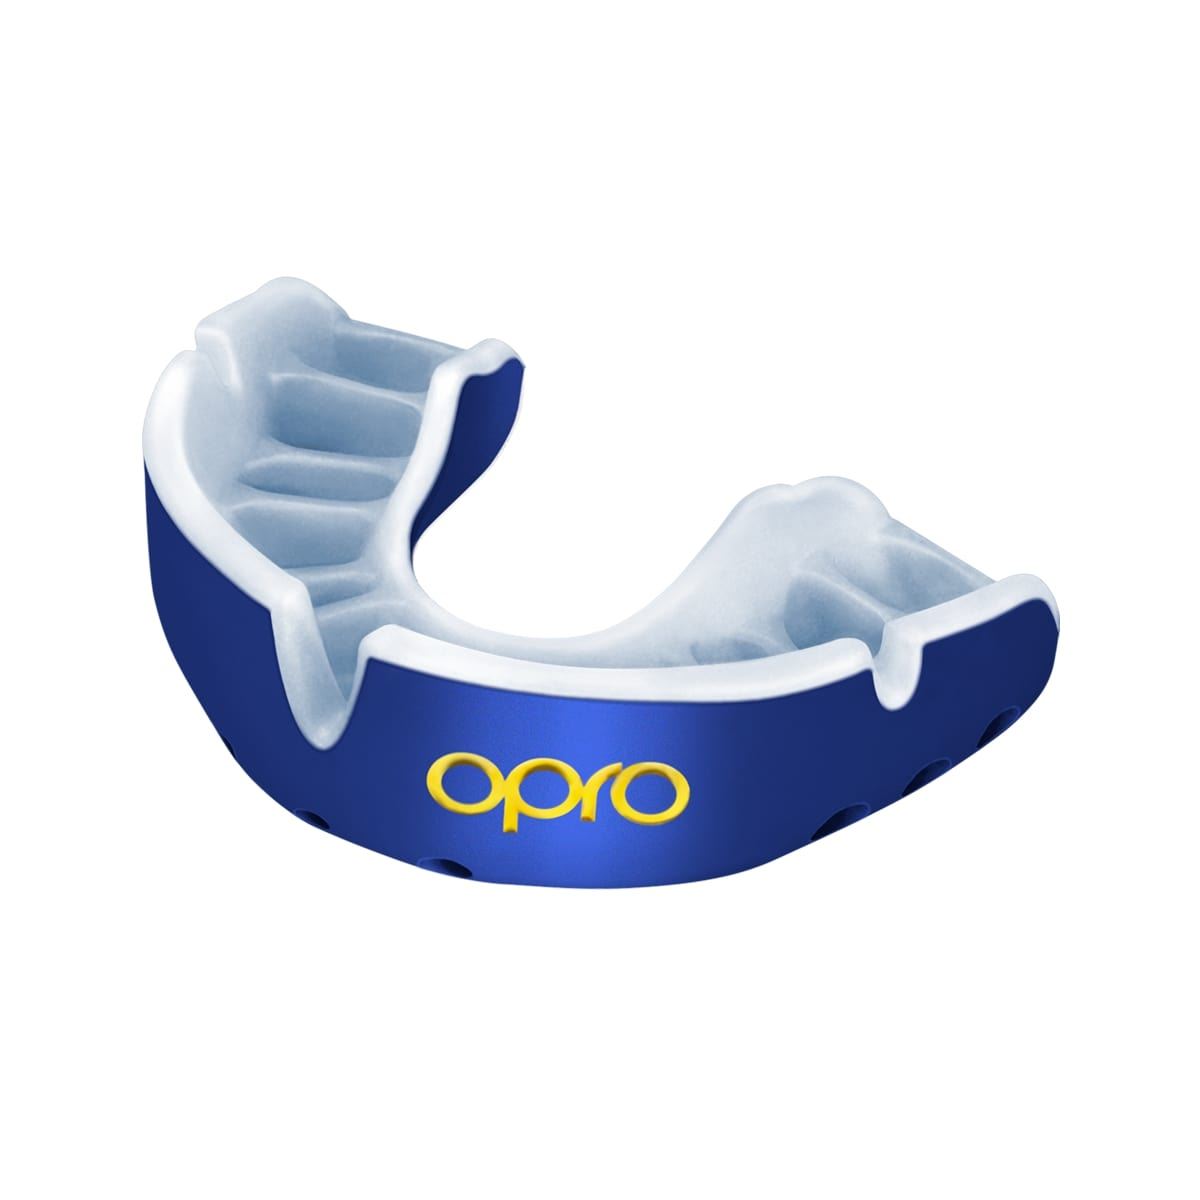 Men's Rugby Protective Mouthguard OPRO Self-Fit Gold 2022 Blue/Pearl